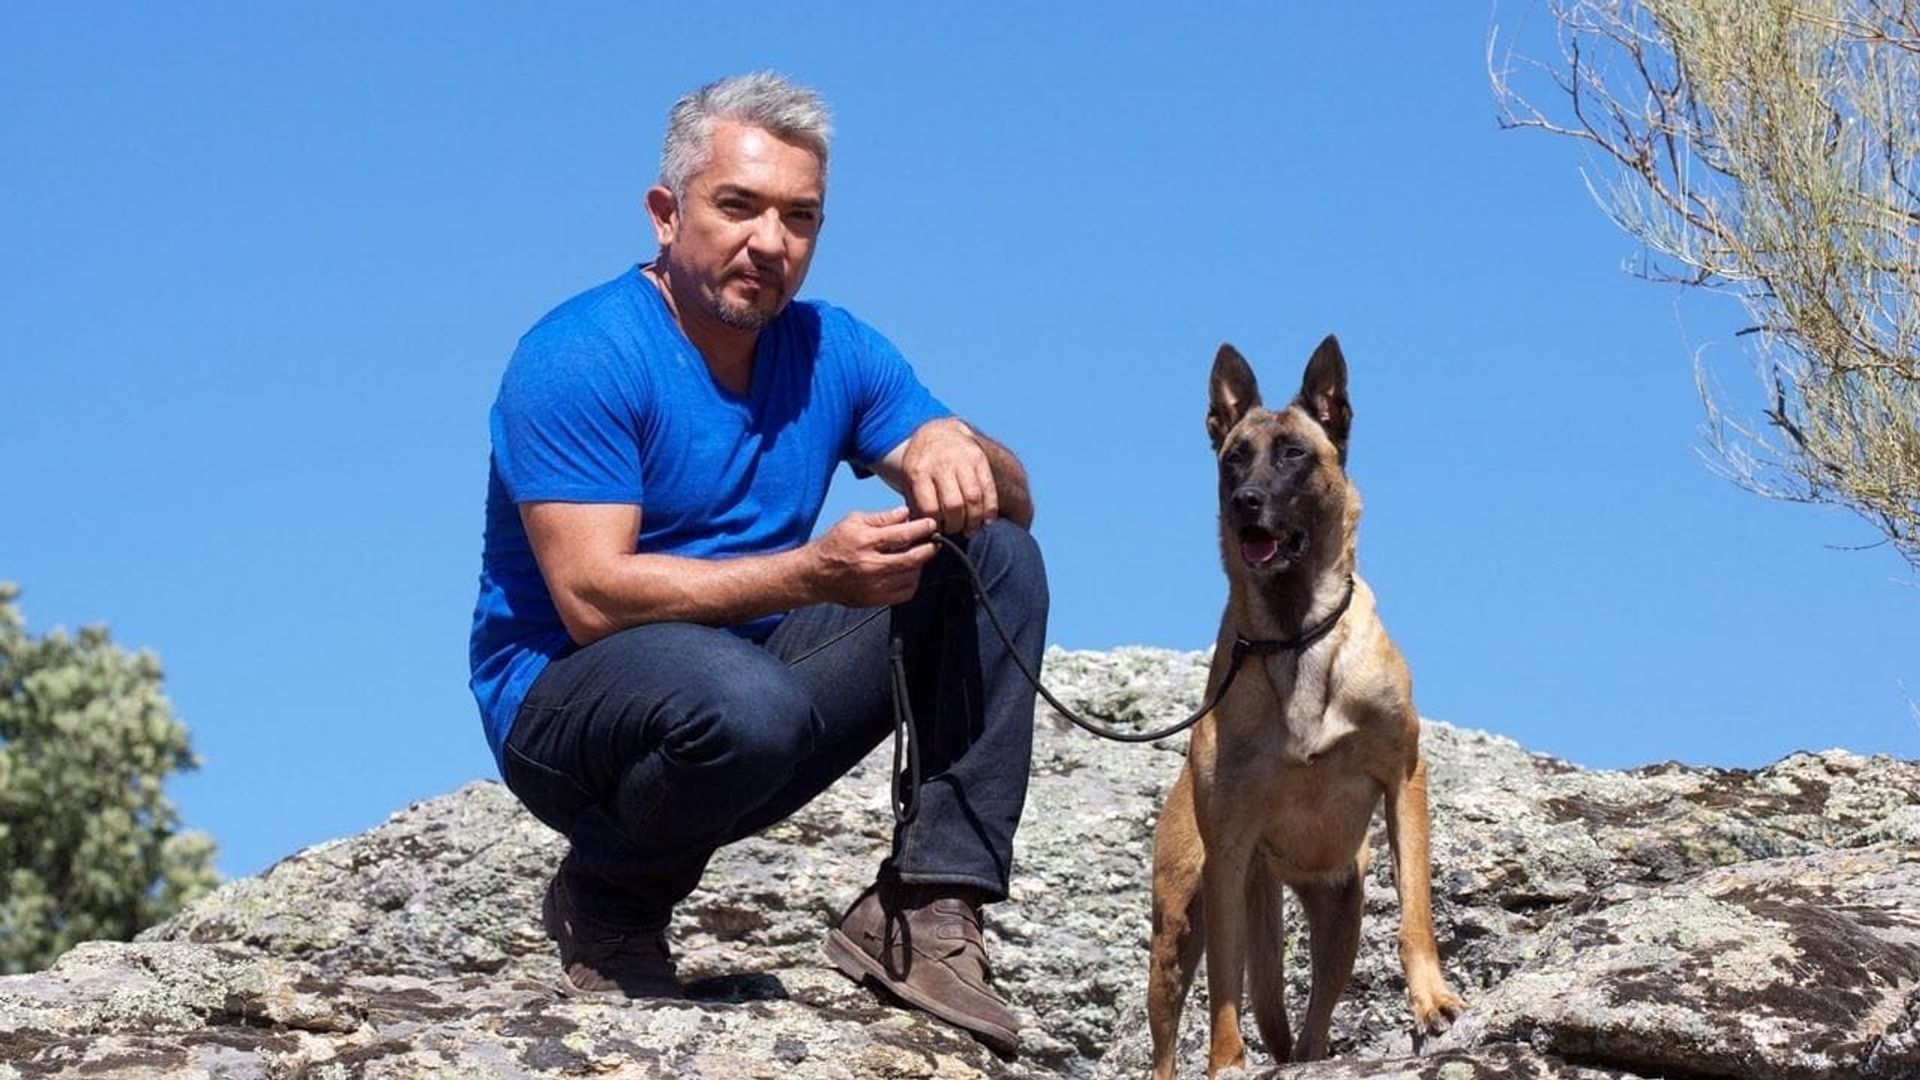 Cesar Millan's Leader of the Pack background